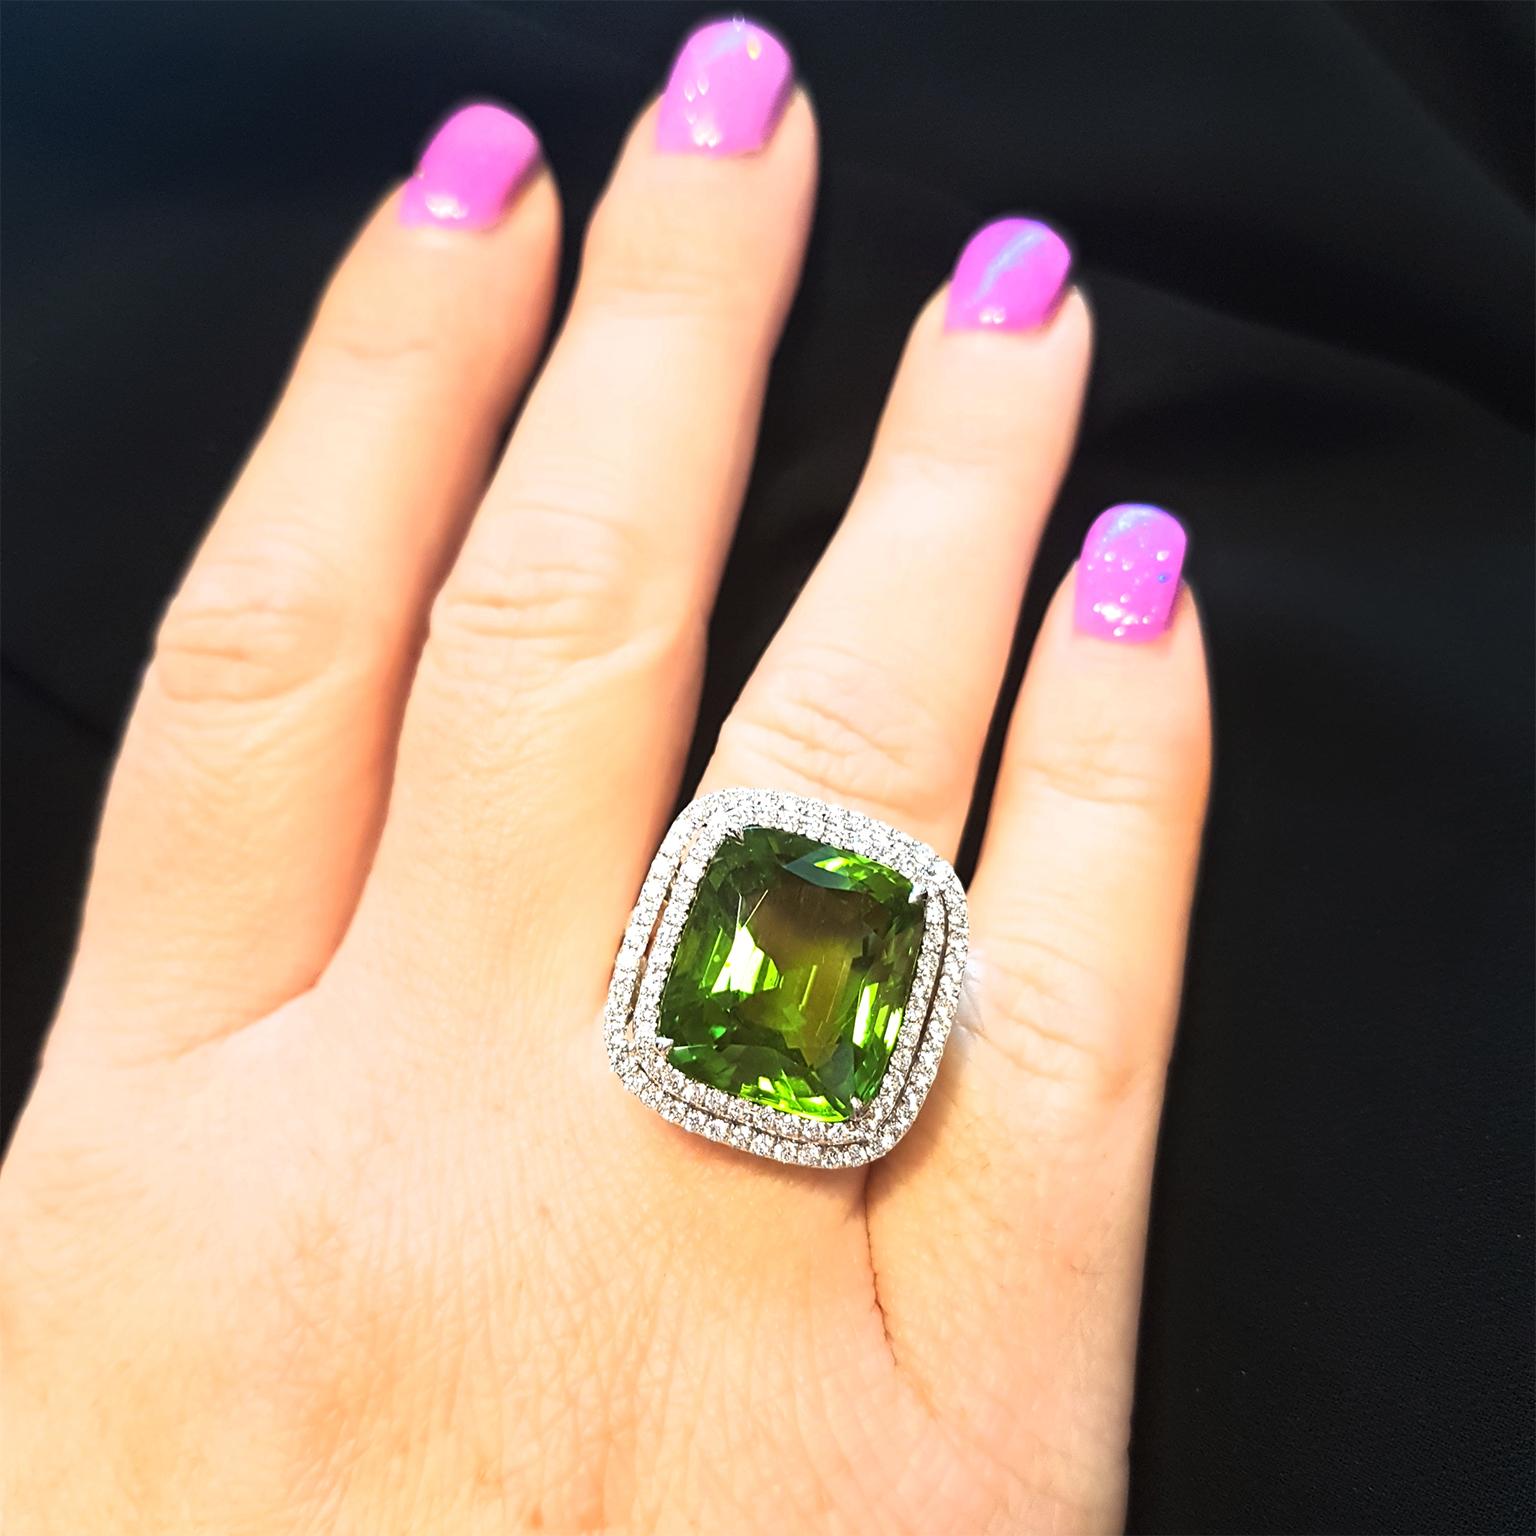 PURE PERIDOT! This magnificent cocktail ring has been crafted in 18ct Yellow & White Gold and set with a double-halo of 1.25ct glittering fine white diamonds & a captivating 18.12ct vivid Peridot. One-off & Exclusive!